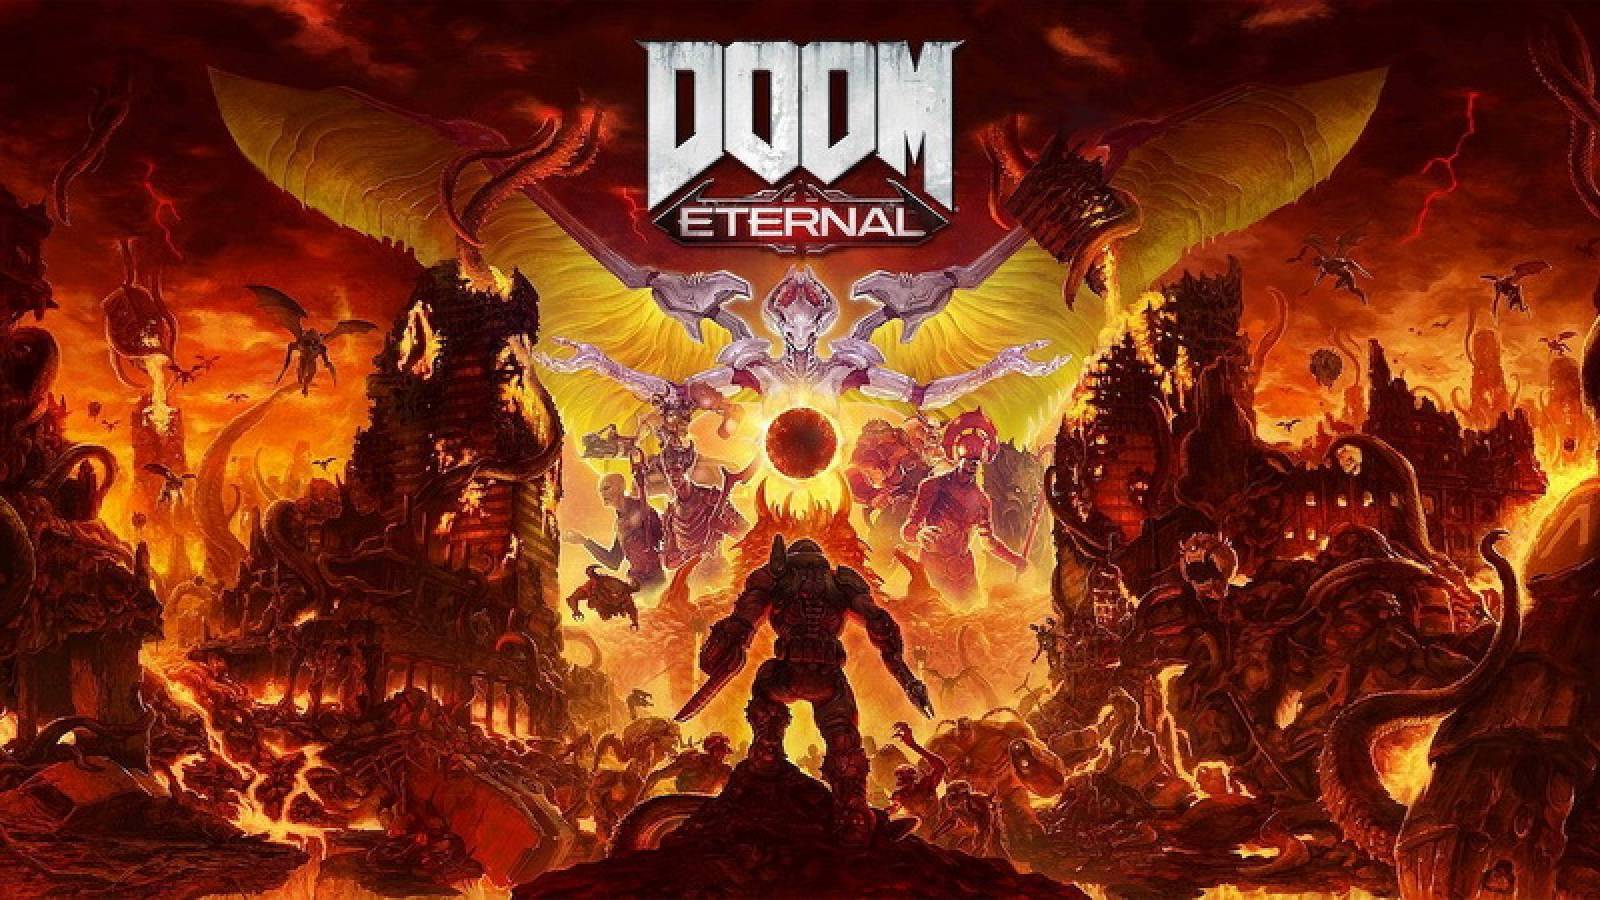 Three things you need to know about Doom Eternal before drawing the game